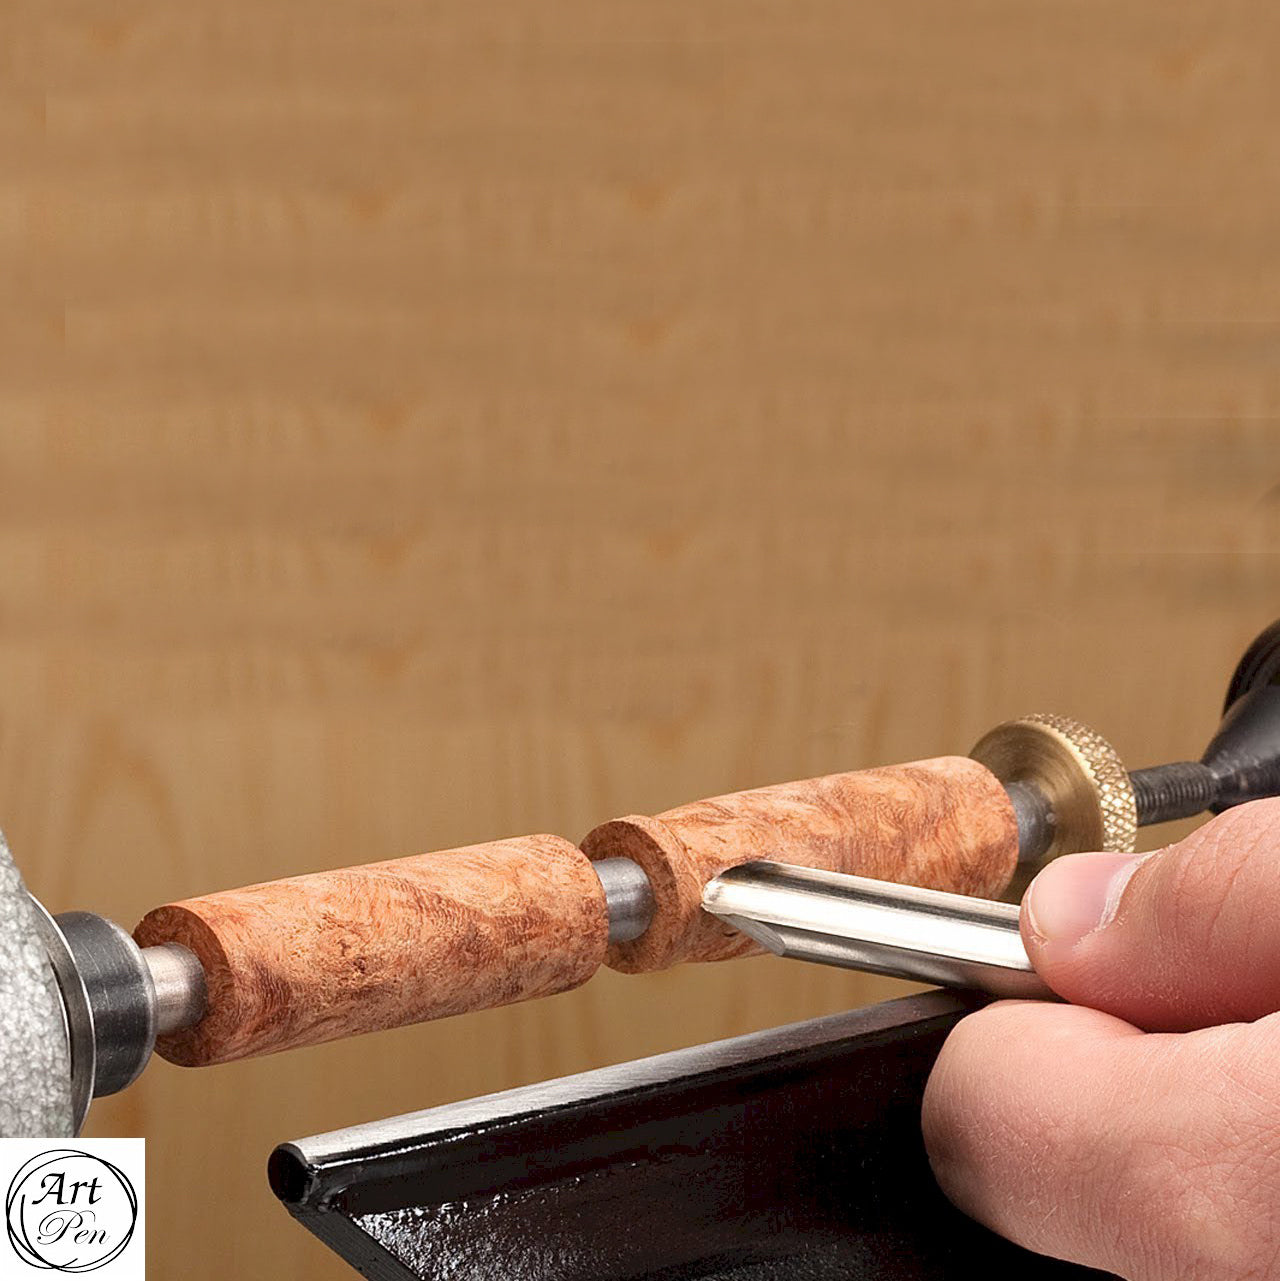 ART-PEN: Handcrafted Luxury Twist Rollerball Pen - Chrome with MIX BROWN acrylic hand turned body - Artistica.com